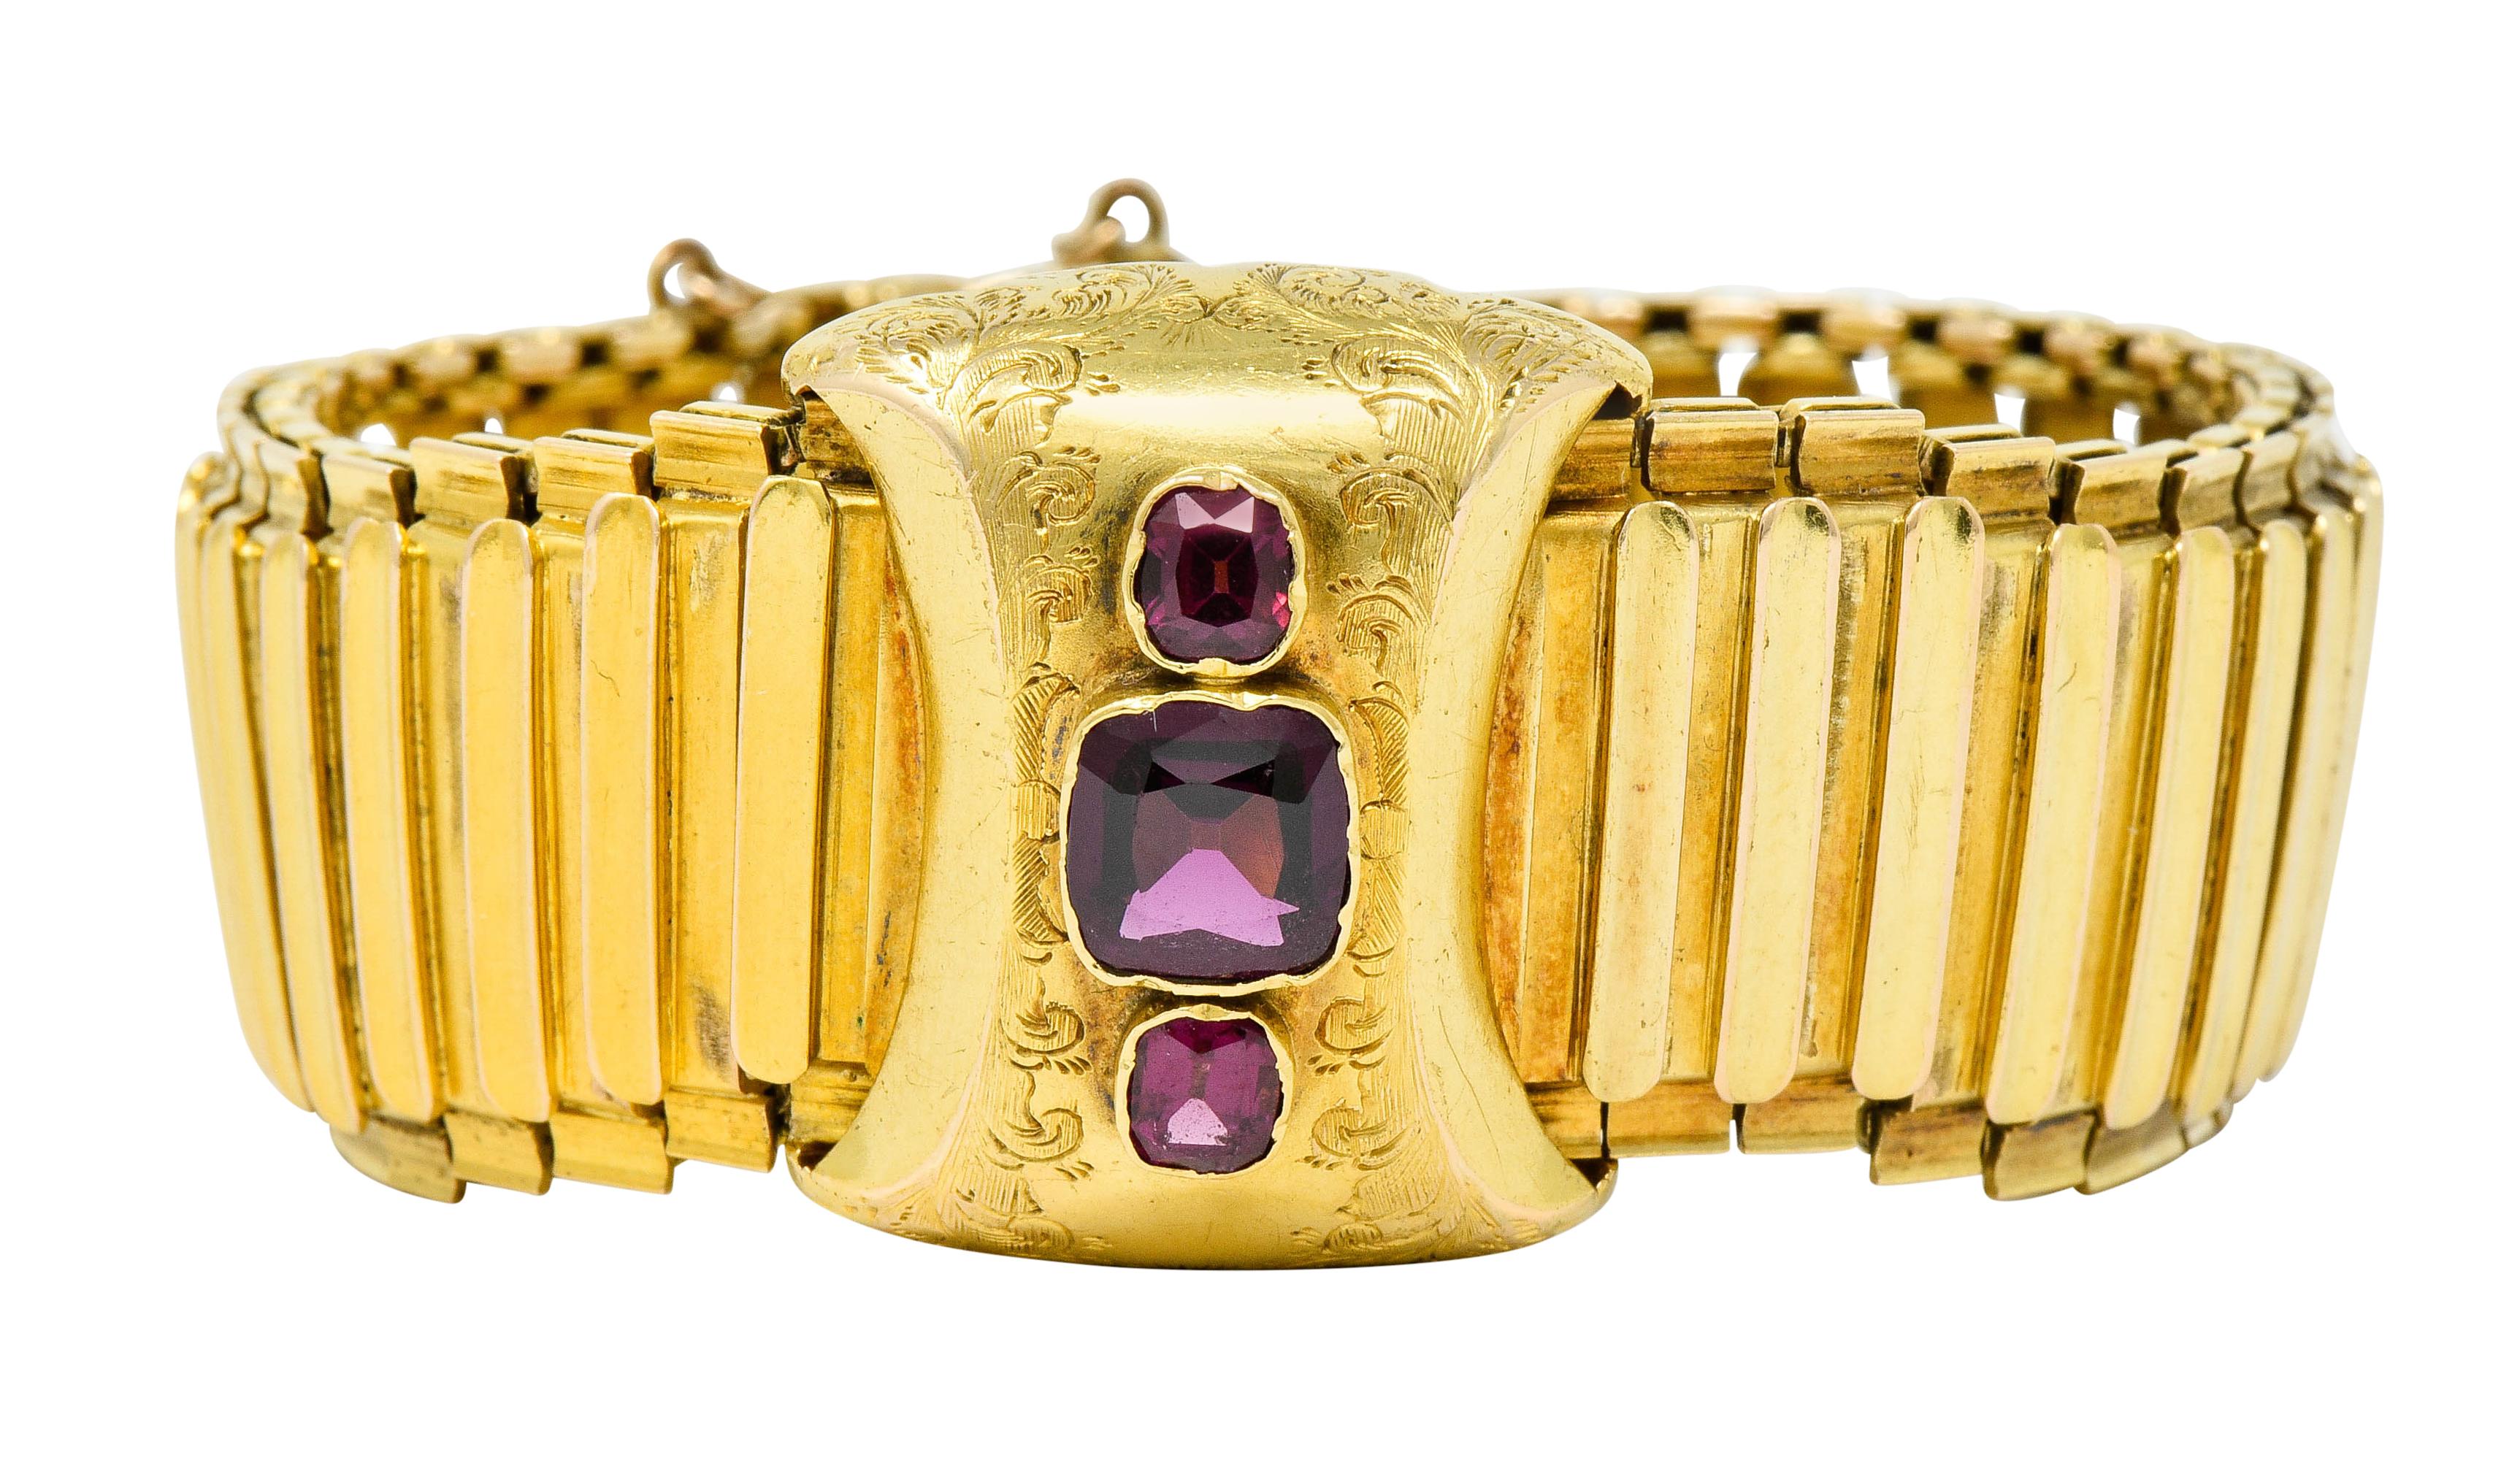 Bracelet is comprised of articulated and deeply ridged rectangular links that flawlessly nest together

With a large hour glass shaped central station, deeply engraved with scrolling foliate

Centering three bezel set rhodolite garnet, cushion cut